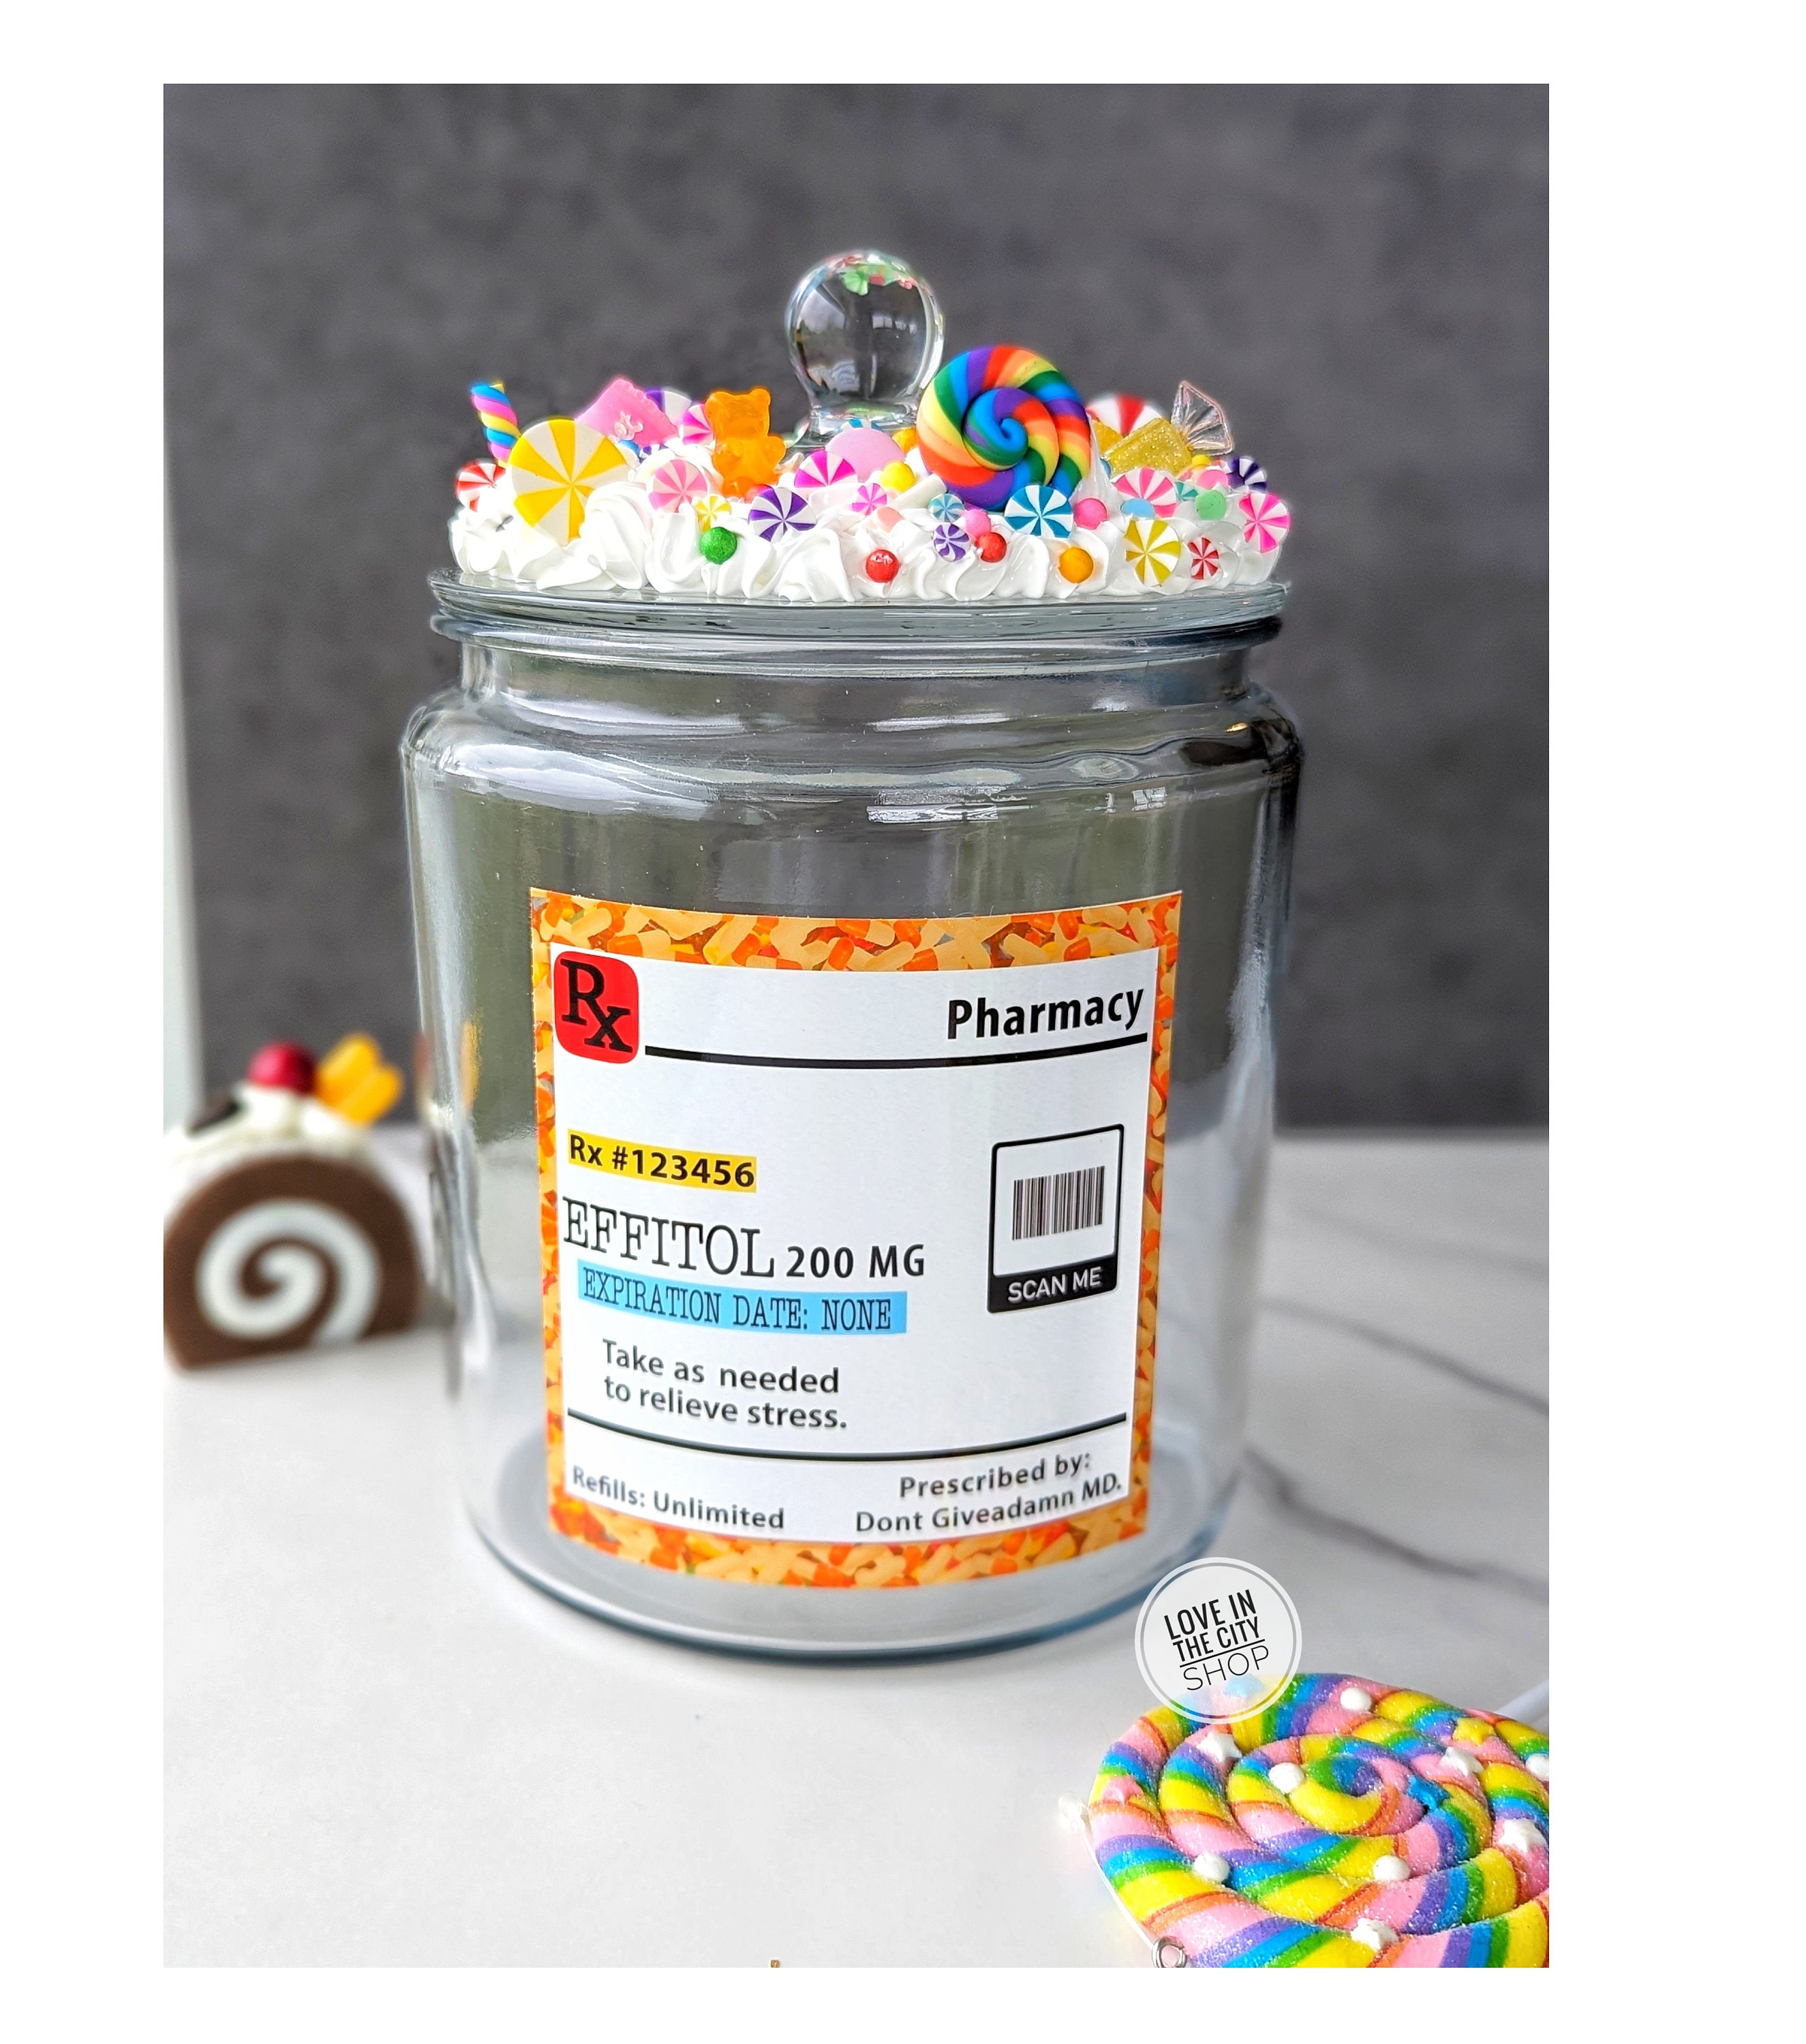 Personalized Funny Glass Candy Jar for Emotional Support, Custom Office Candy  Jar With Whipped Cream Lid, Large Glass Candy Jar for Display 